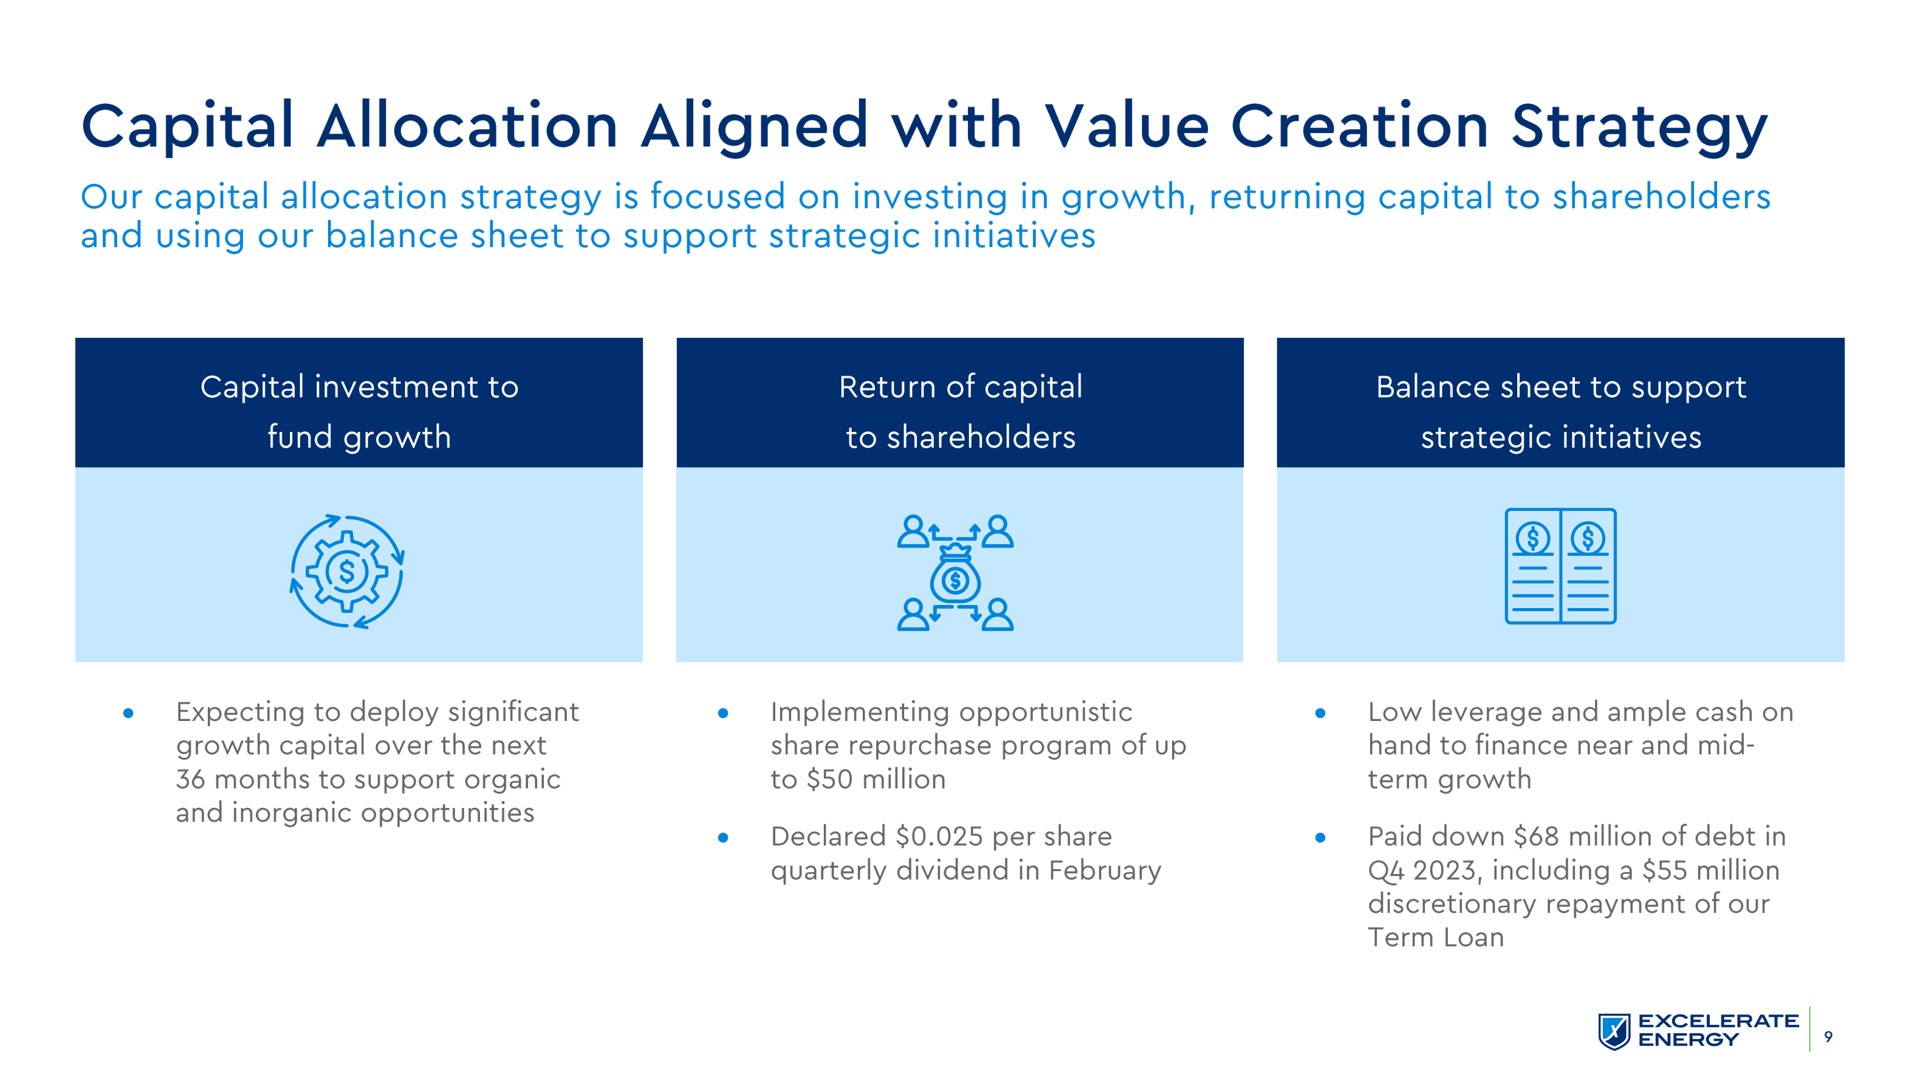 capital allocation aligned with value creation strategy ars | Excelerate Energy